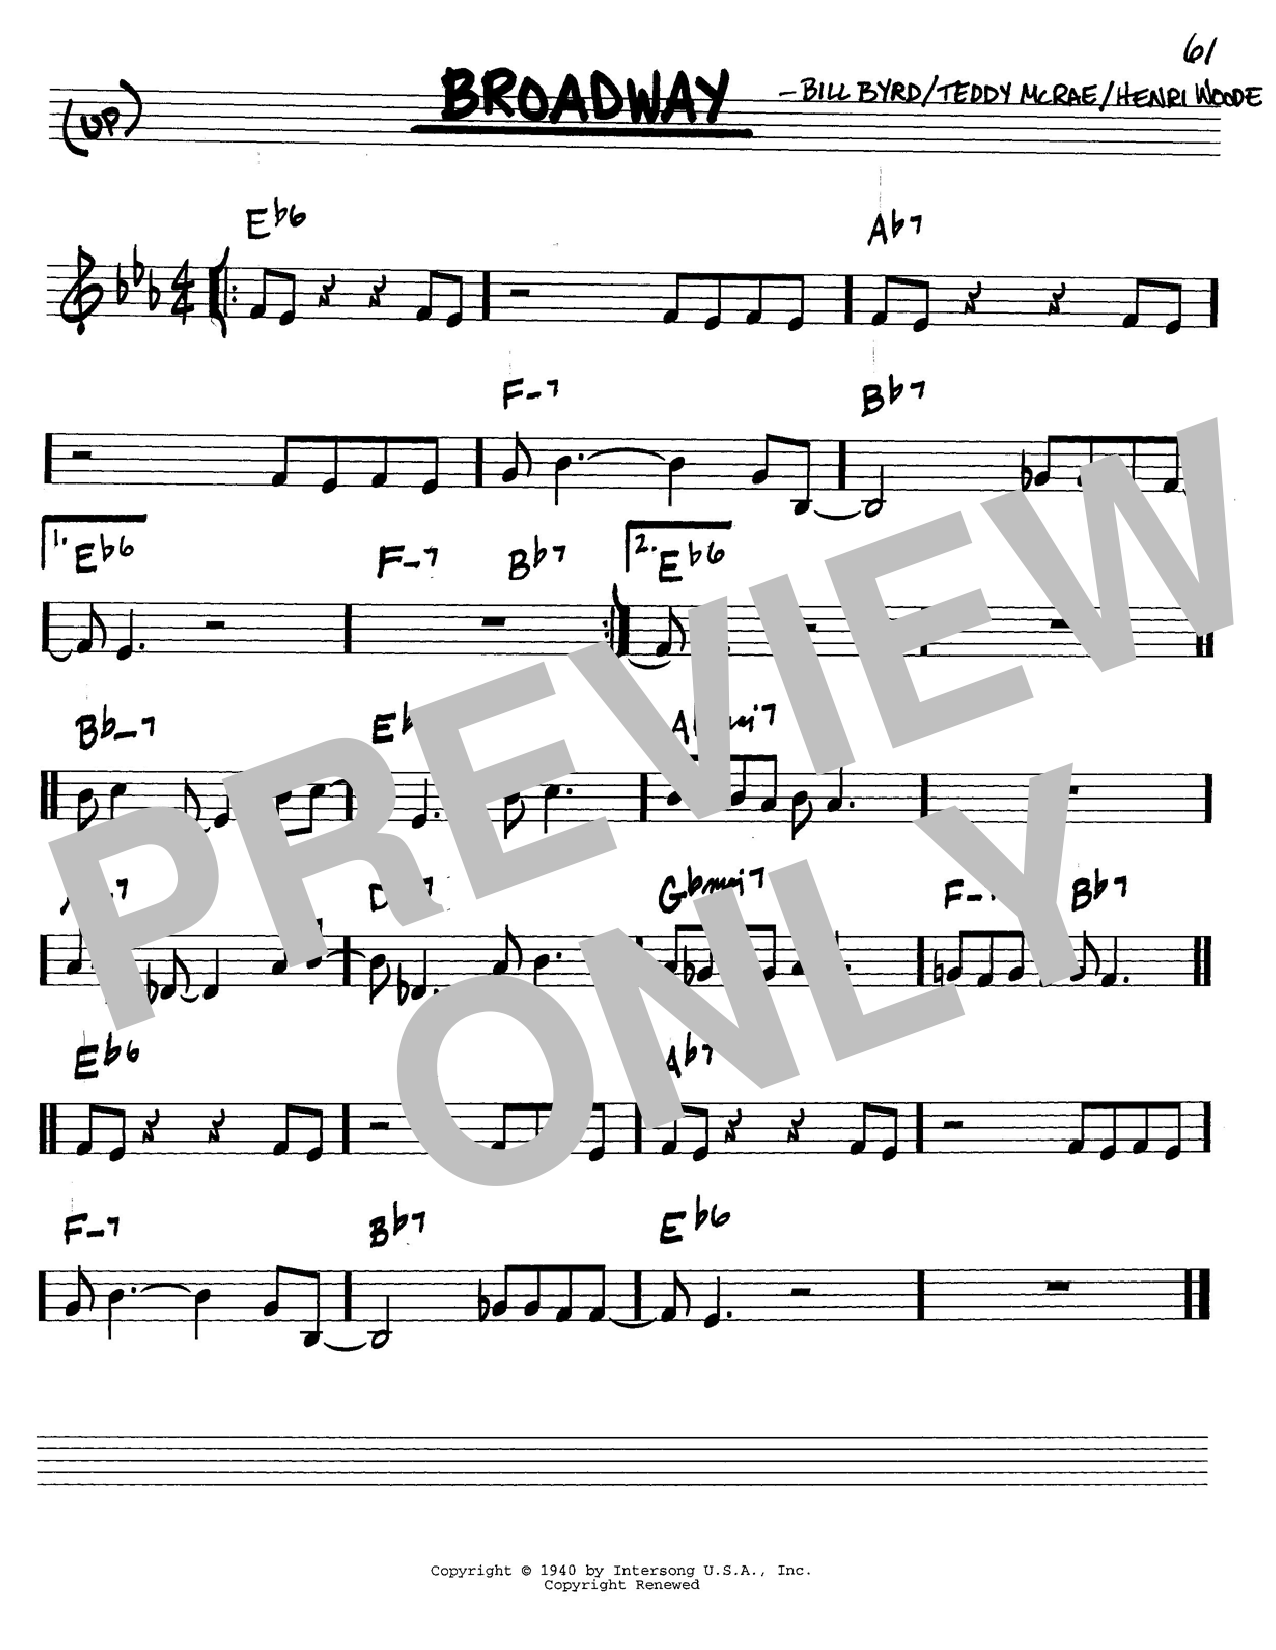 Count Basie Broadway sheet music preview music notes and score for Guitar Tab including 2 page(s)